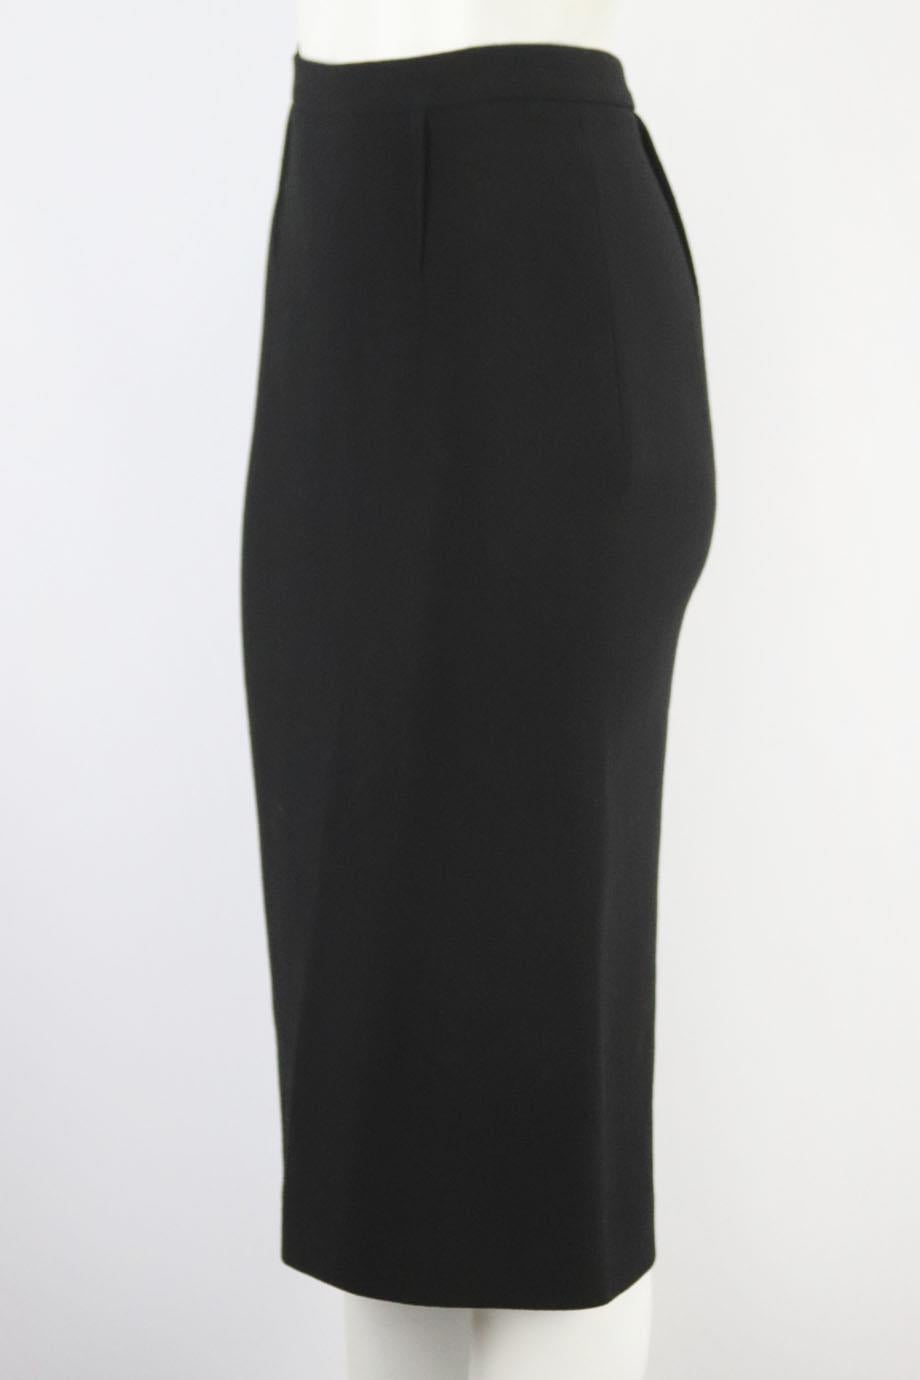 Roland Mouret wool crepe midi skirt. Black. Zip fastening at back. 100% Wool. Size: UK 10 (US 6, FR 38, IT 42). Waist: 27 in. Hips: 36 in. Length: 29.5 in Very good condition - Some marks throughout; see pictures.
